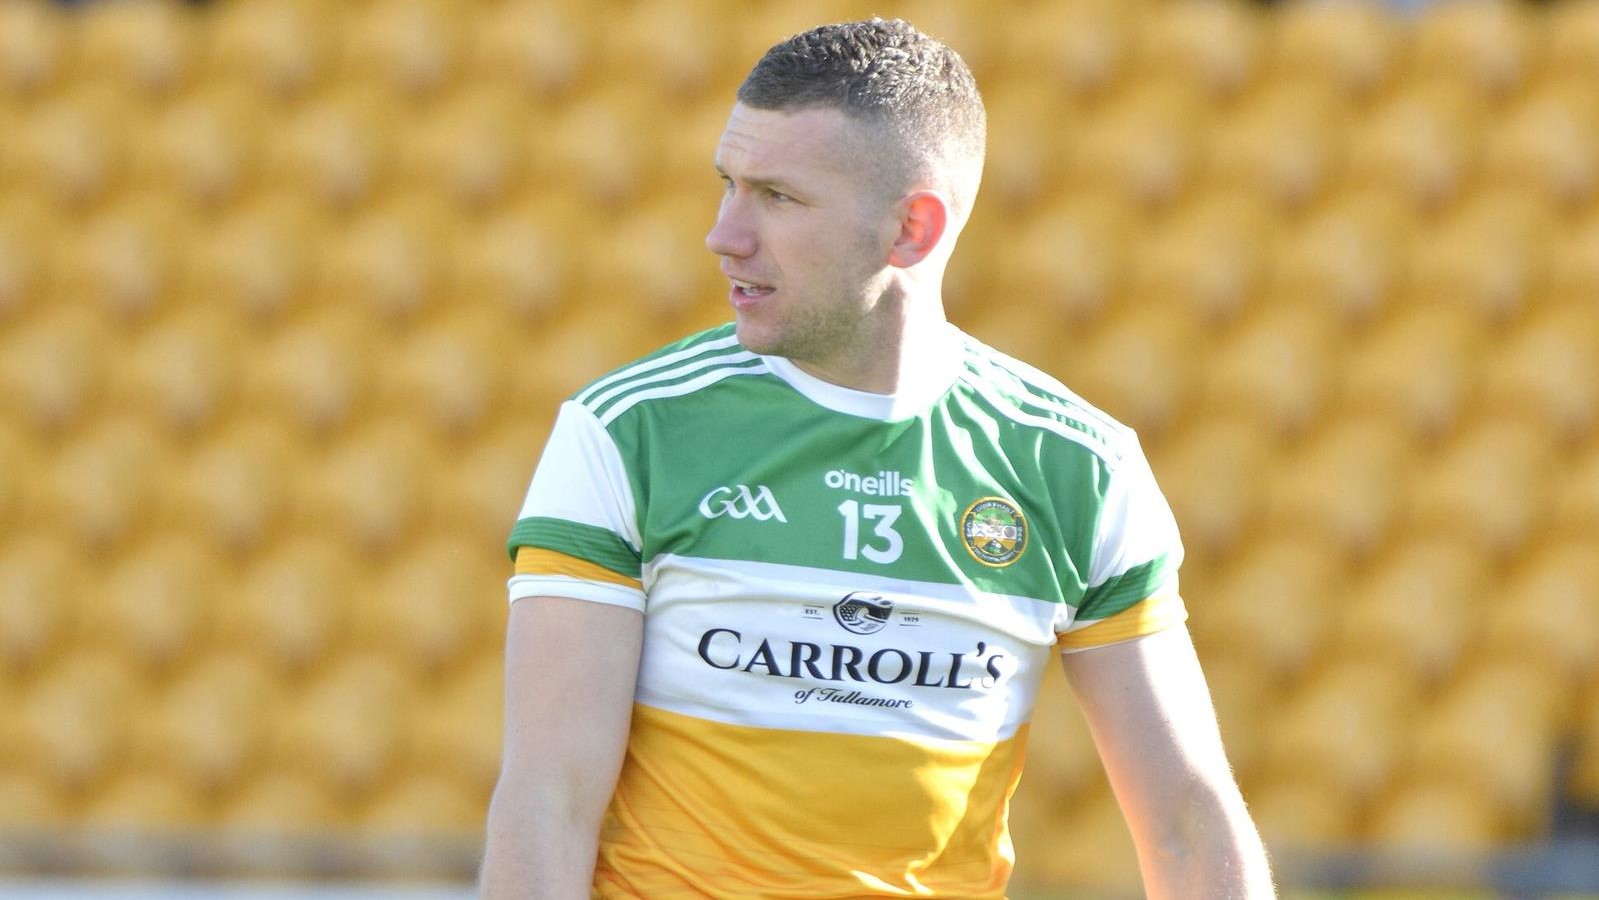 Offaly Take On Louth In Championship Opener